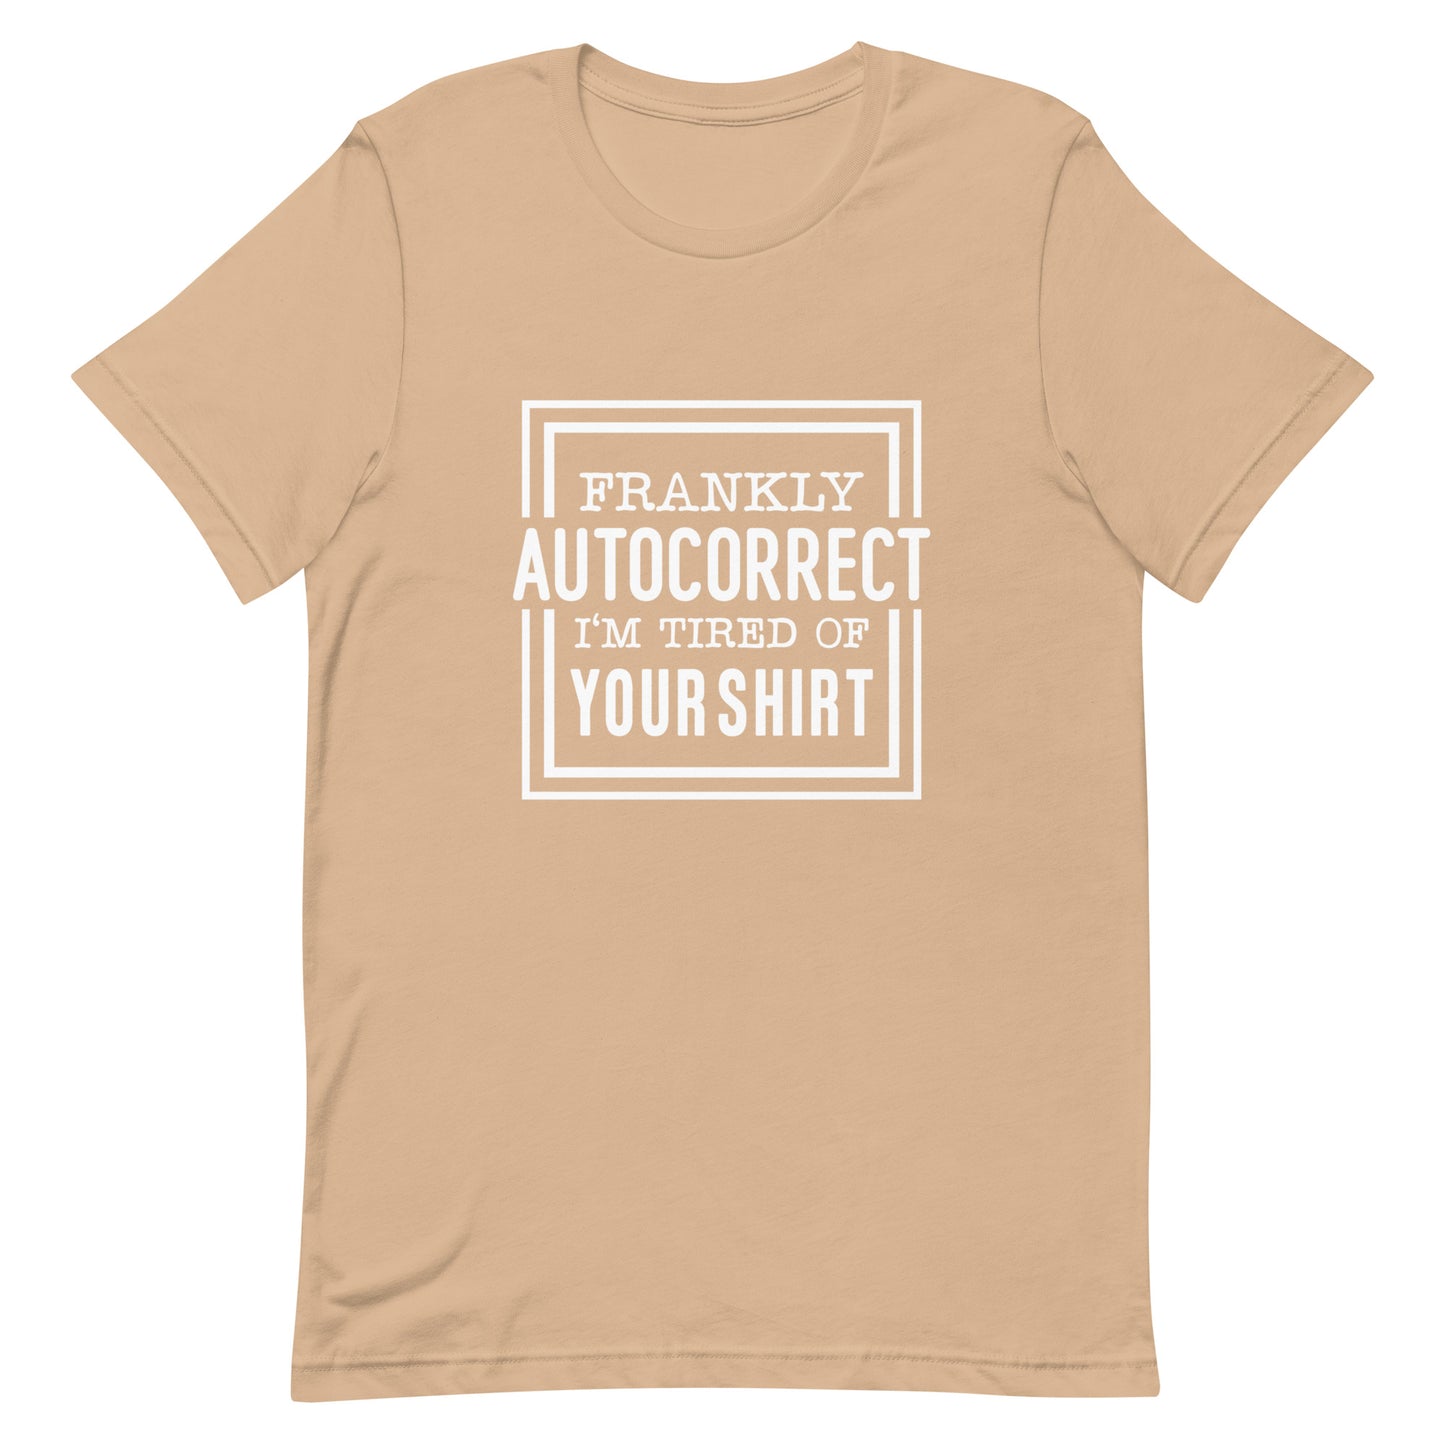 Frankly Autocorrect I'm of Tired of Your Shirt Unisex T-shirt